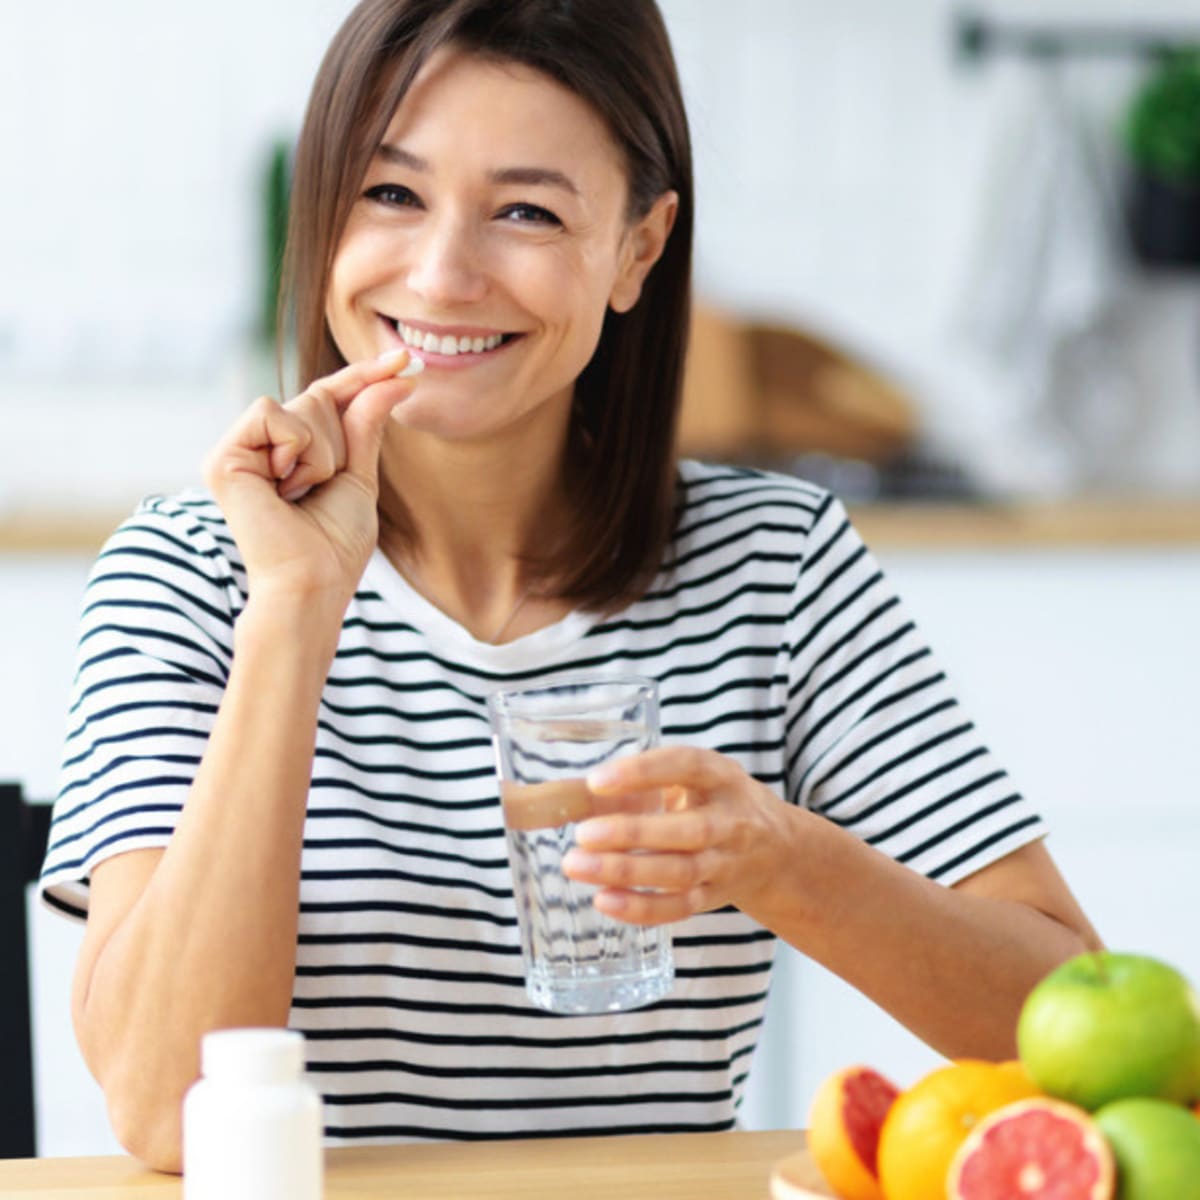 Suppressing appetite effectively